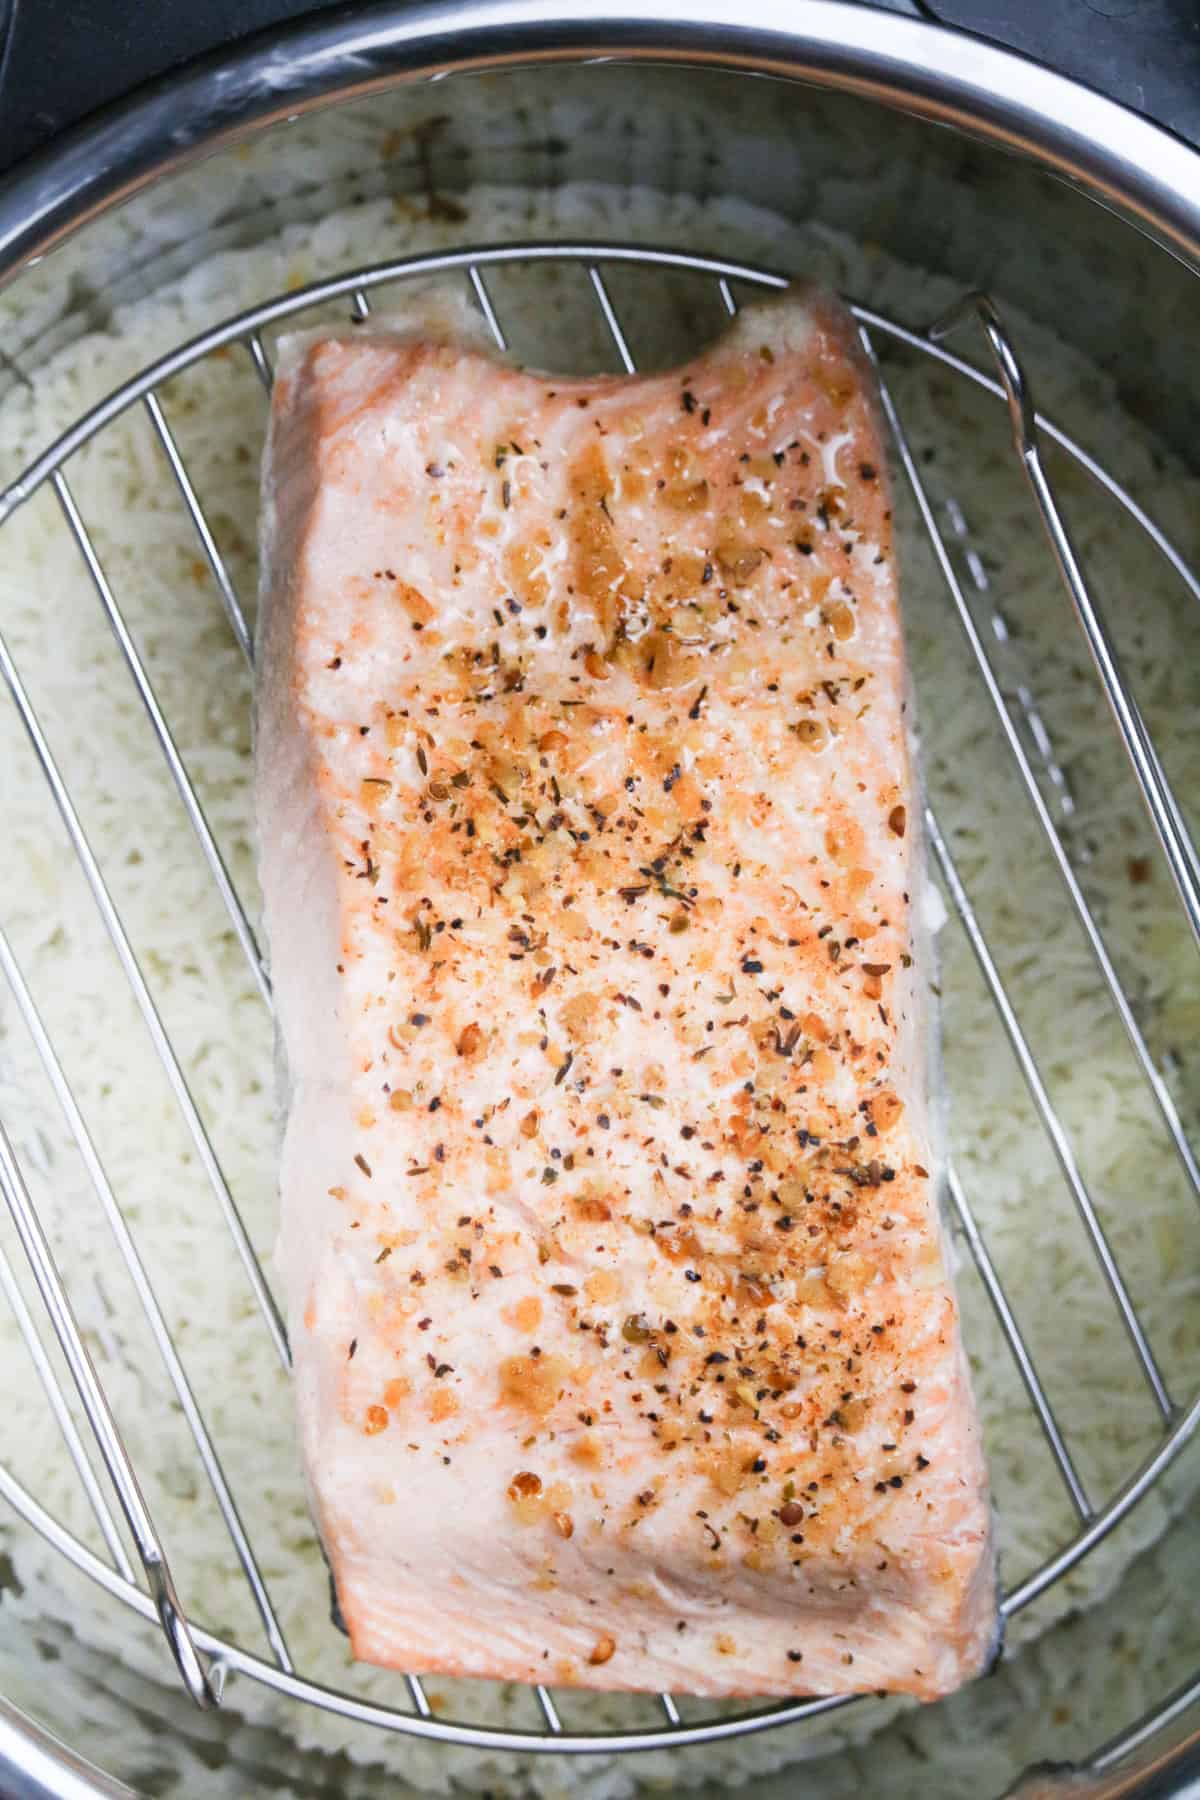 Are you ready to try out a delicious and healthy dinner recipe that doesn't take hours of laborious preparation and cooking? With the Instant Pot's simple, time-saving operation, you can have restaurant-worthy Lemon Salmon on your plate in less than 45 minutes. This easy-to-follow guide will show you all the steps how to make this amazing dish featuring lemon juice, garlic, parsley, and dill - perfect for a quick yet impressive midweek meal!